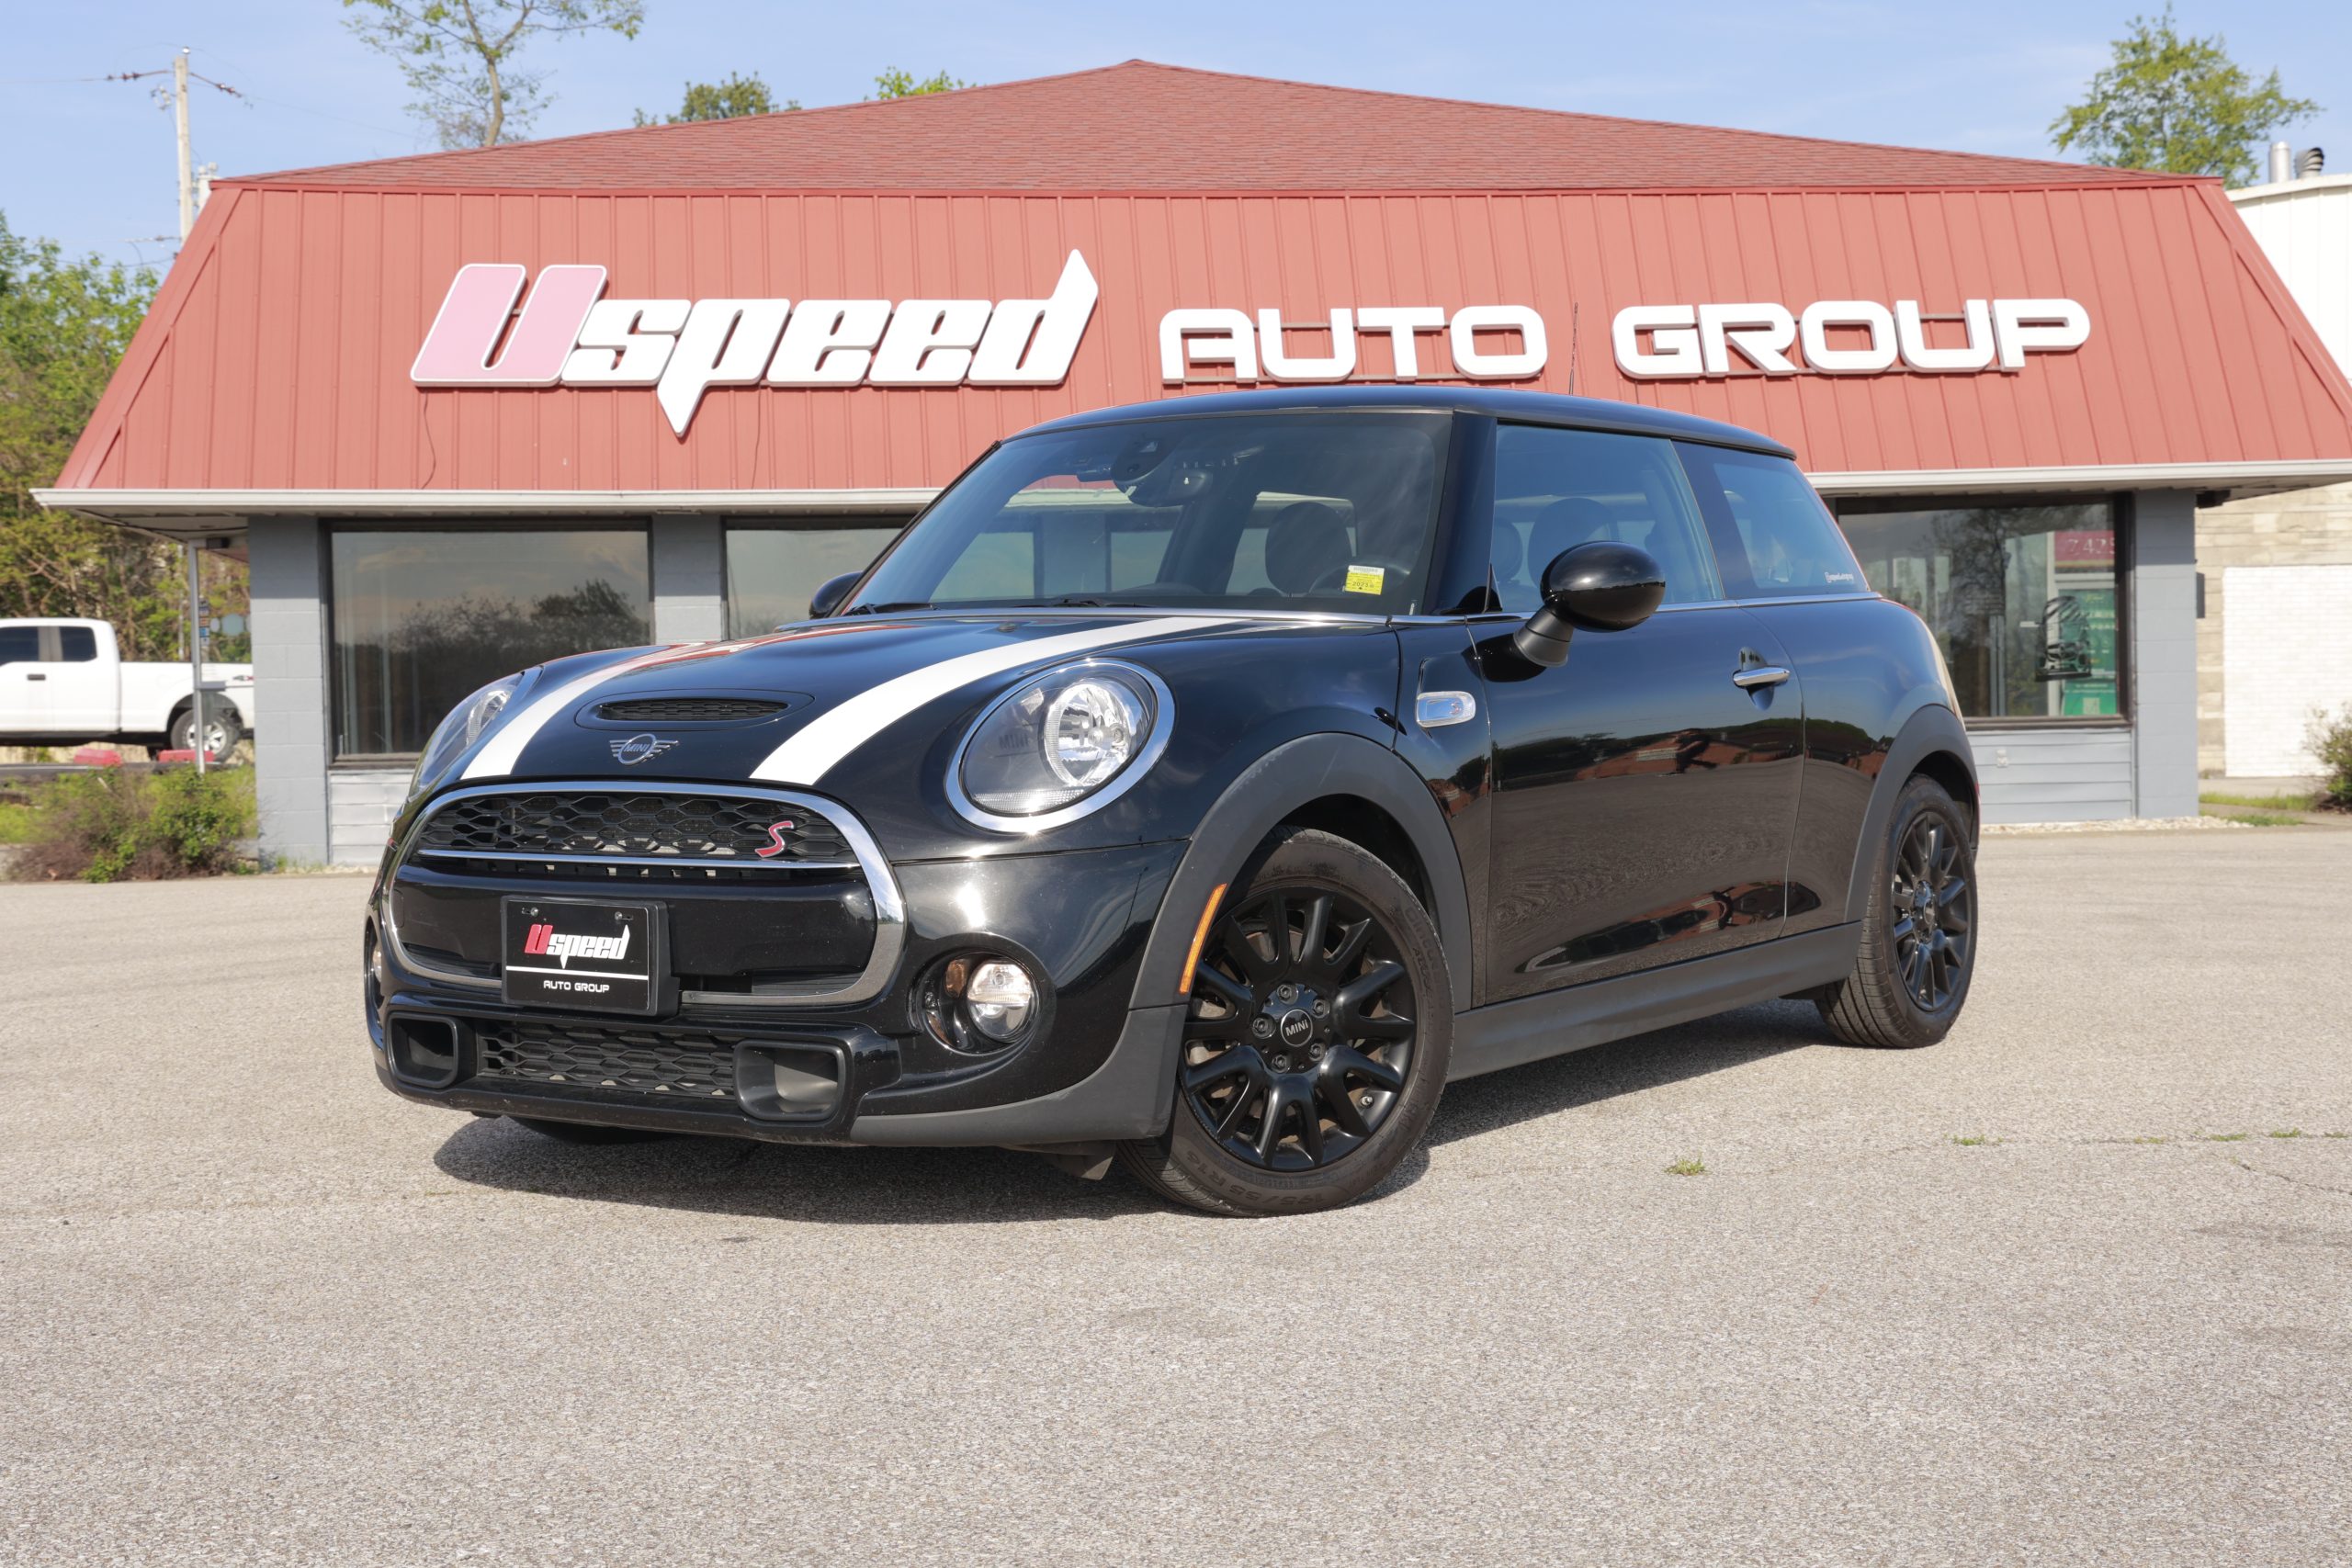 2019 MINI Cooper S - BLACKED OUT 